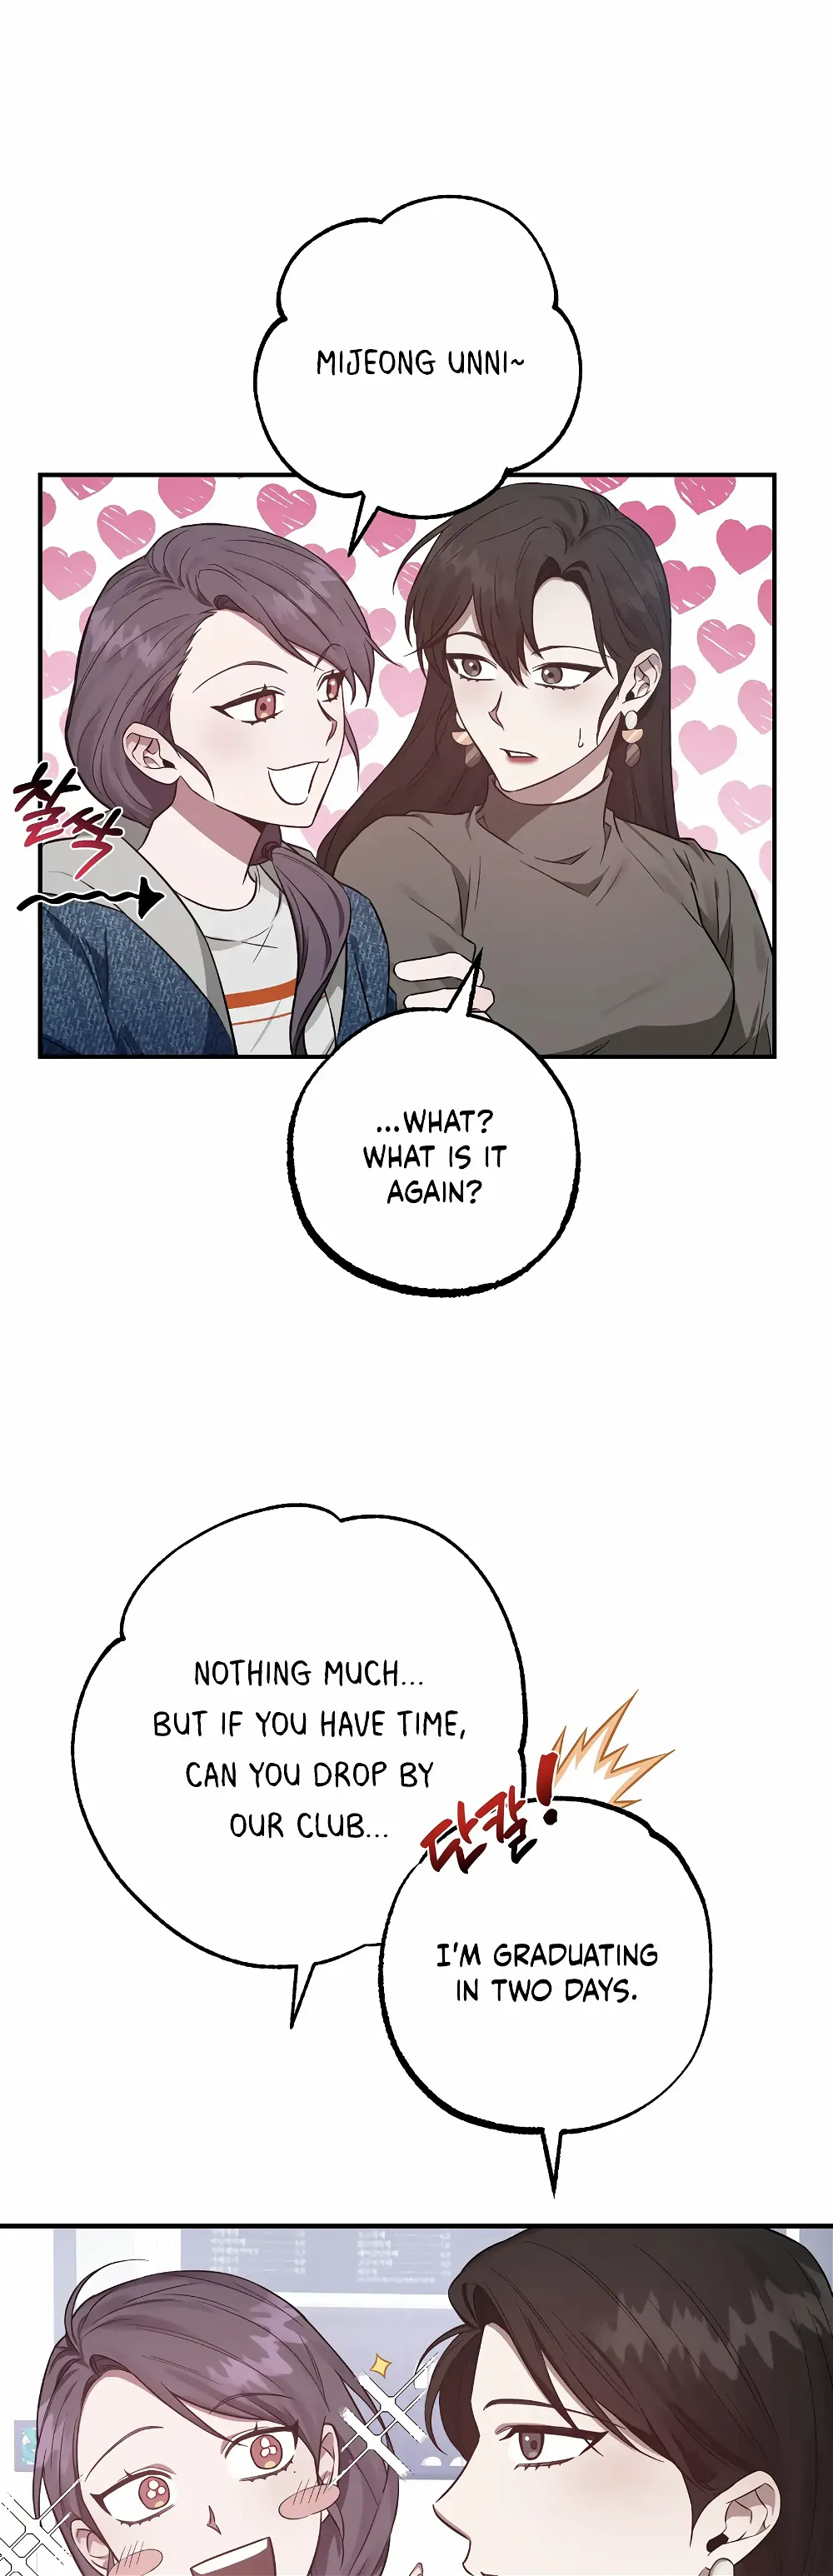 Mijeong’s Relationships chapter 4 - Page 9